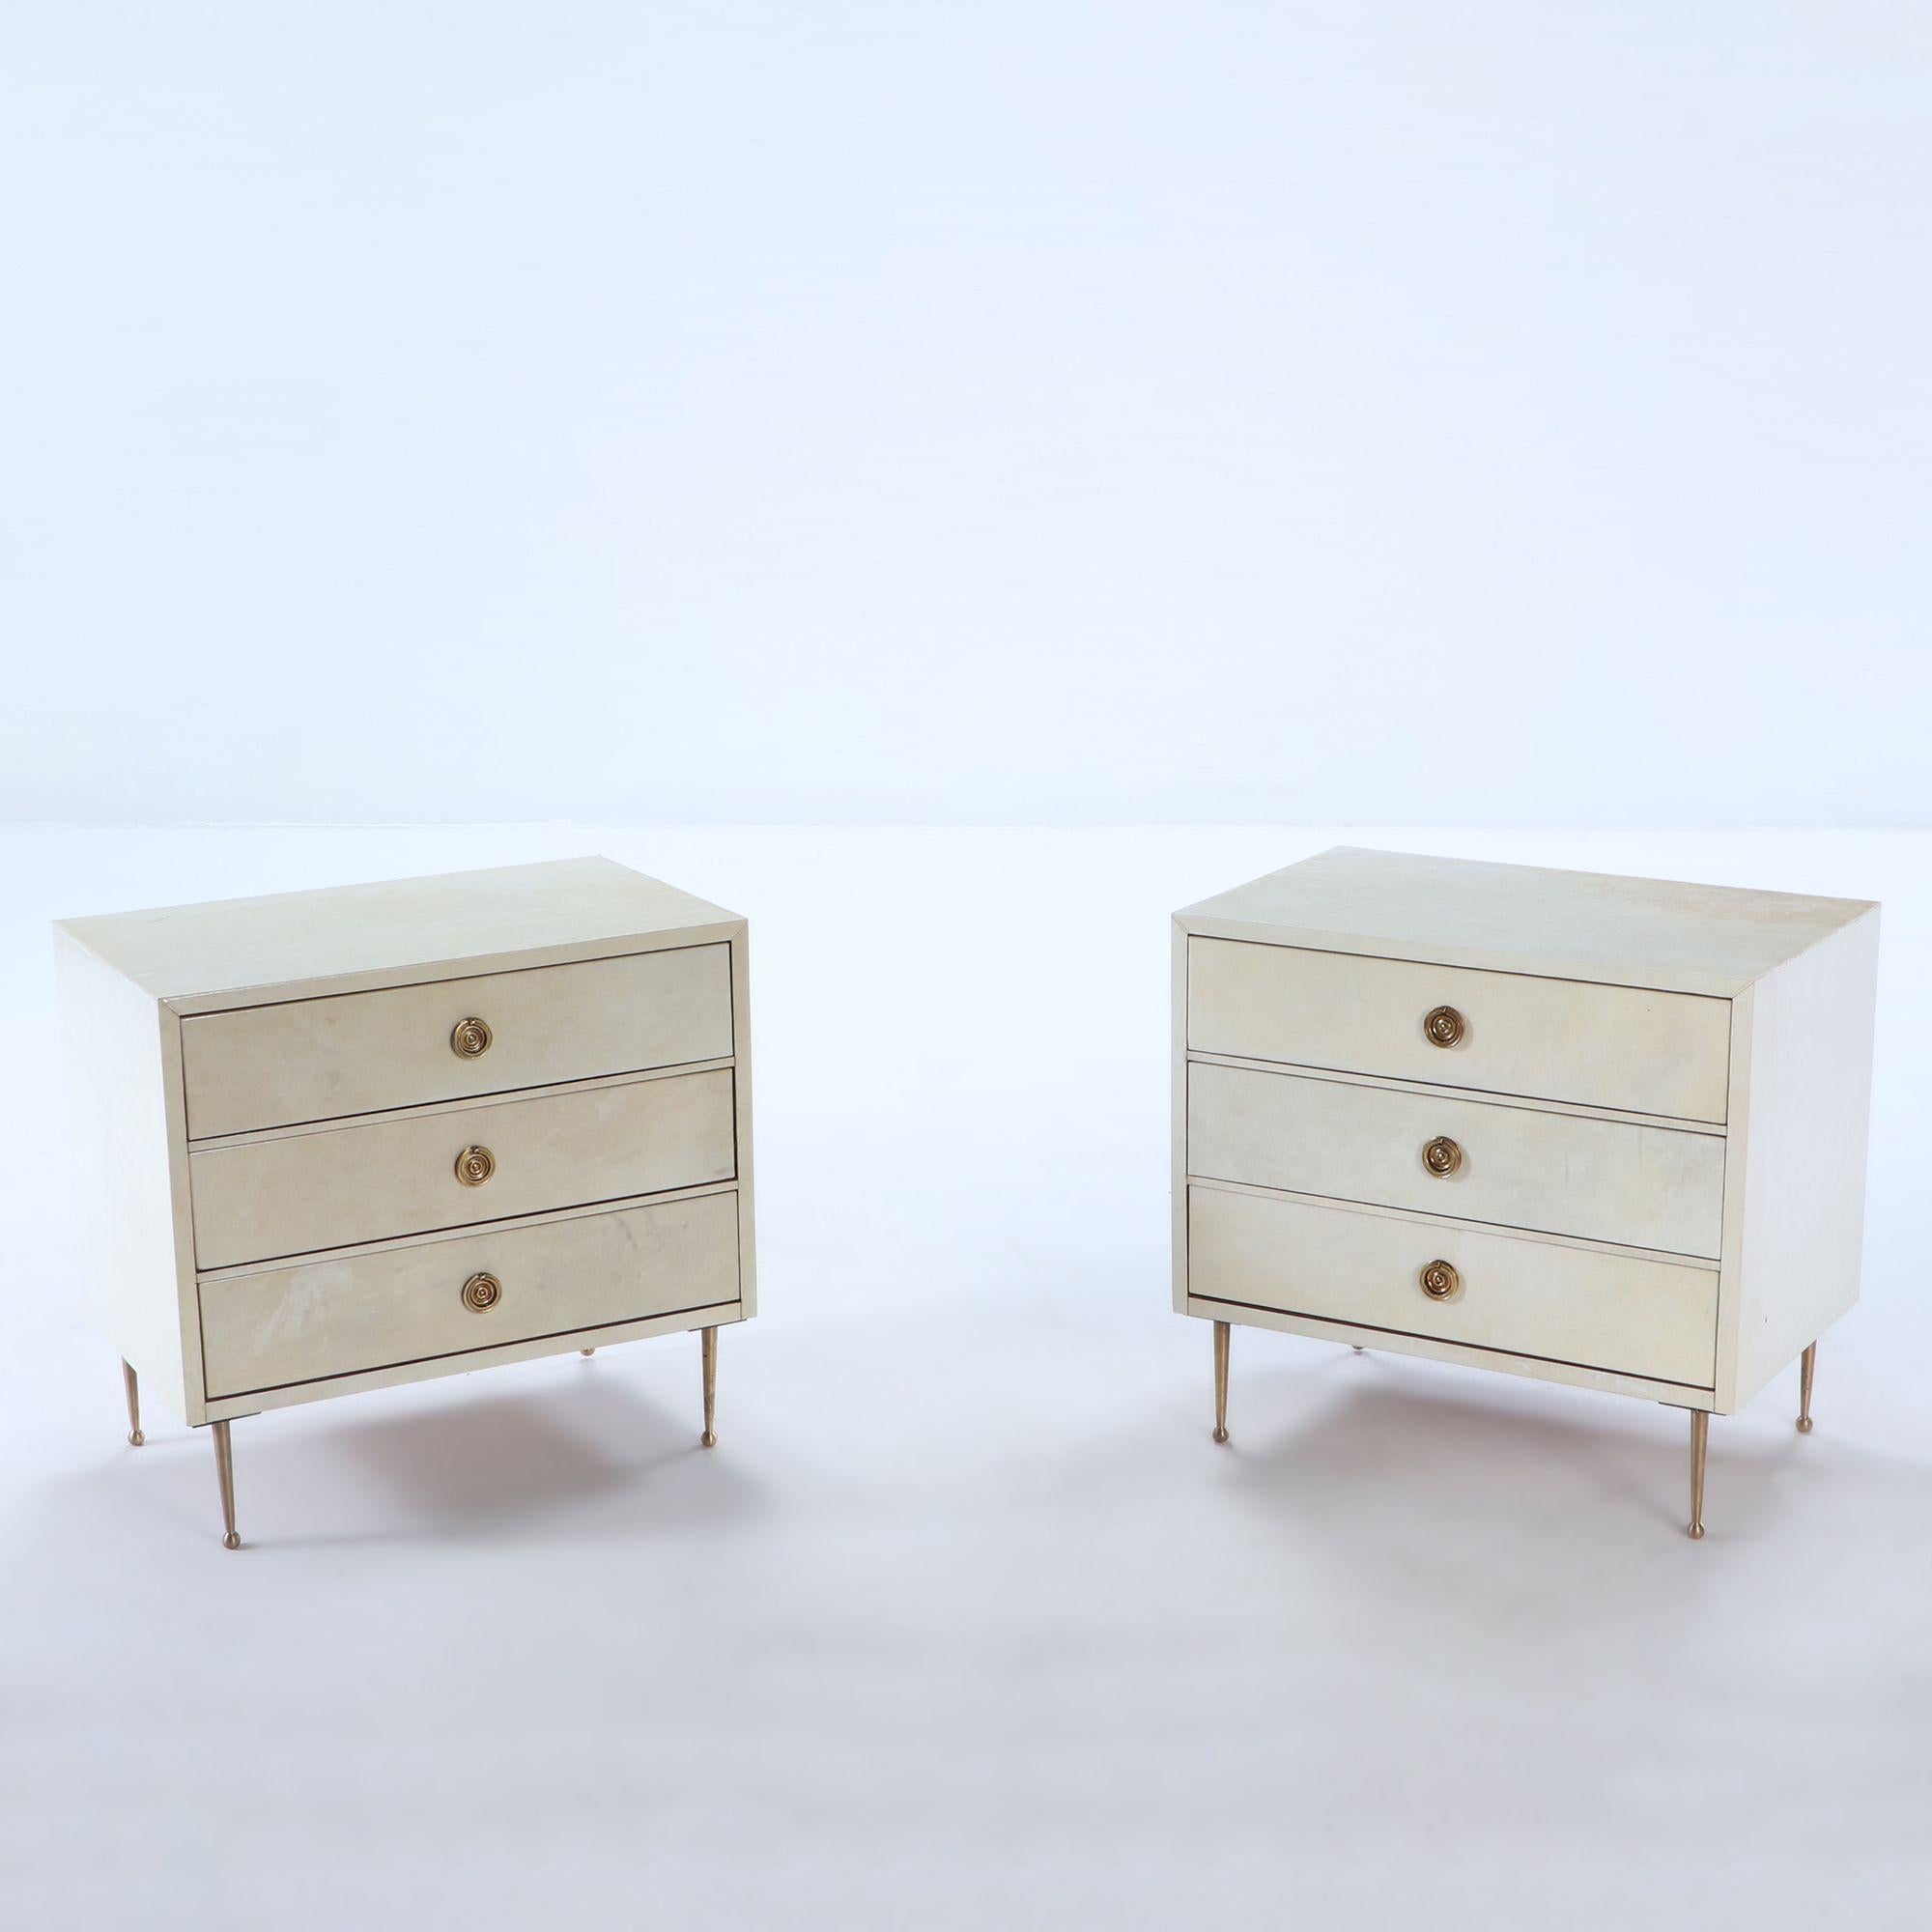 Pair parchment covered nightstands having three drawers, bronze legs and bronze drawer pulls C 1950.